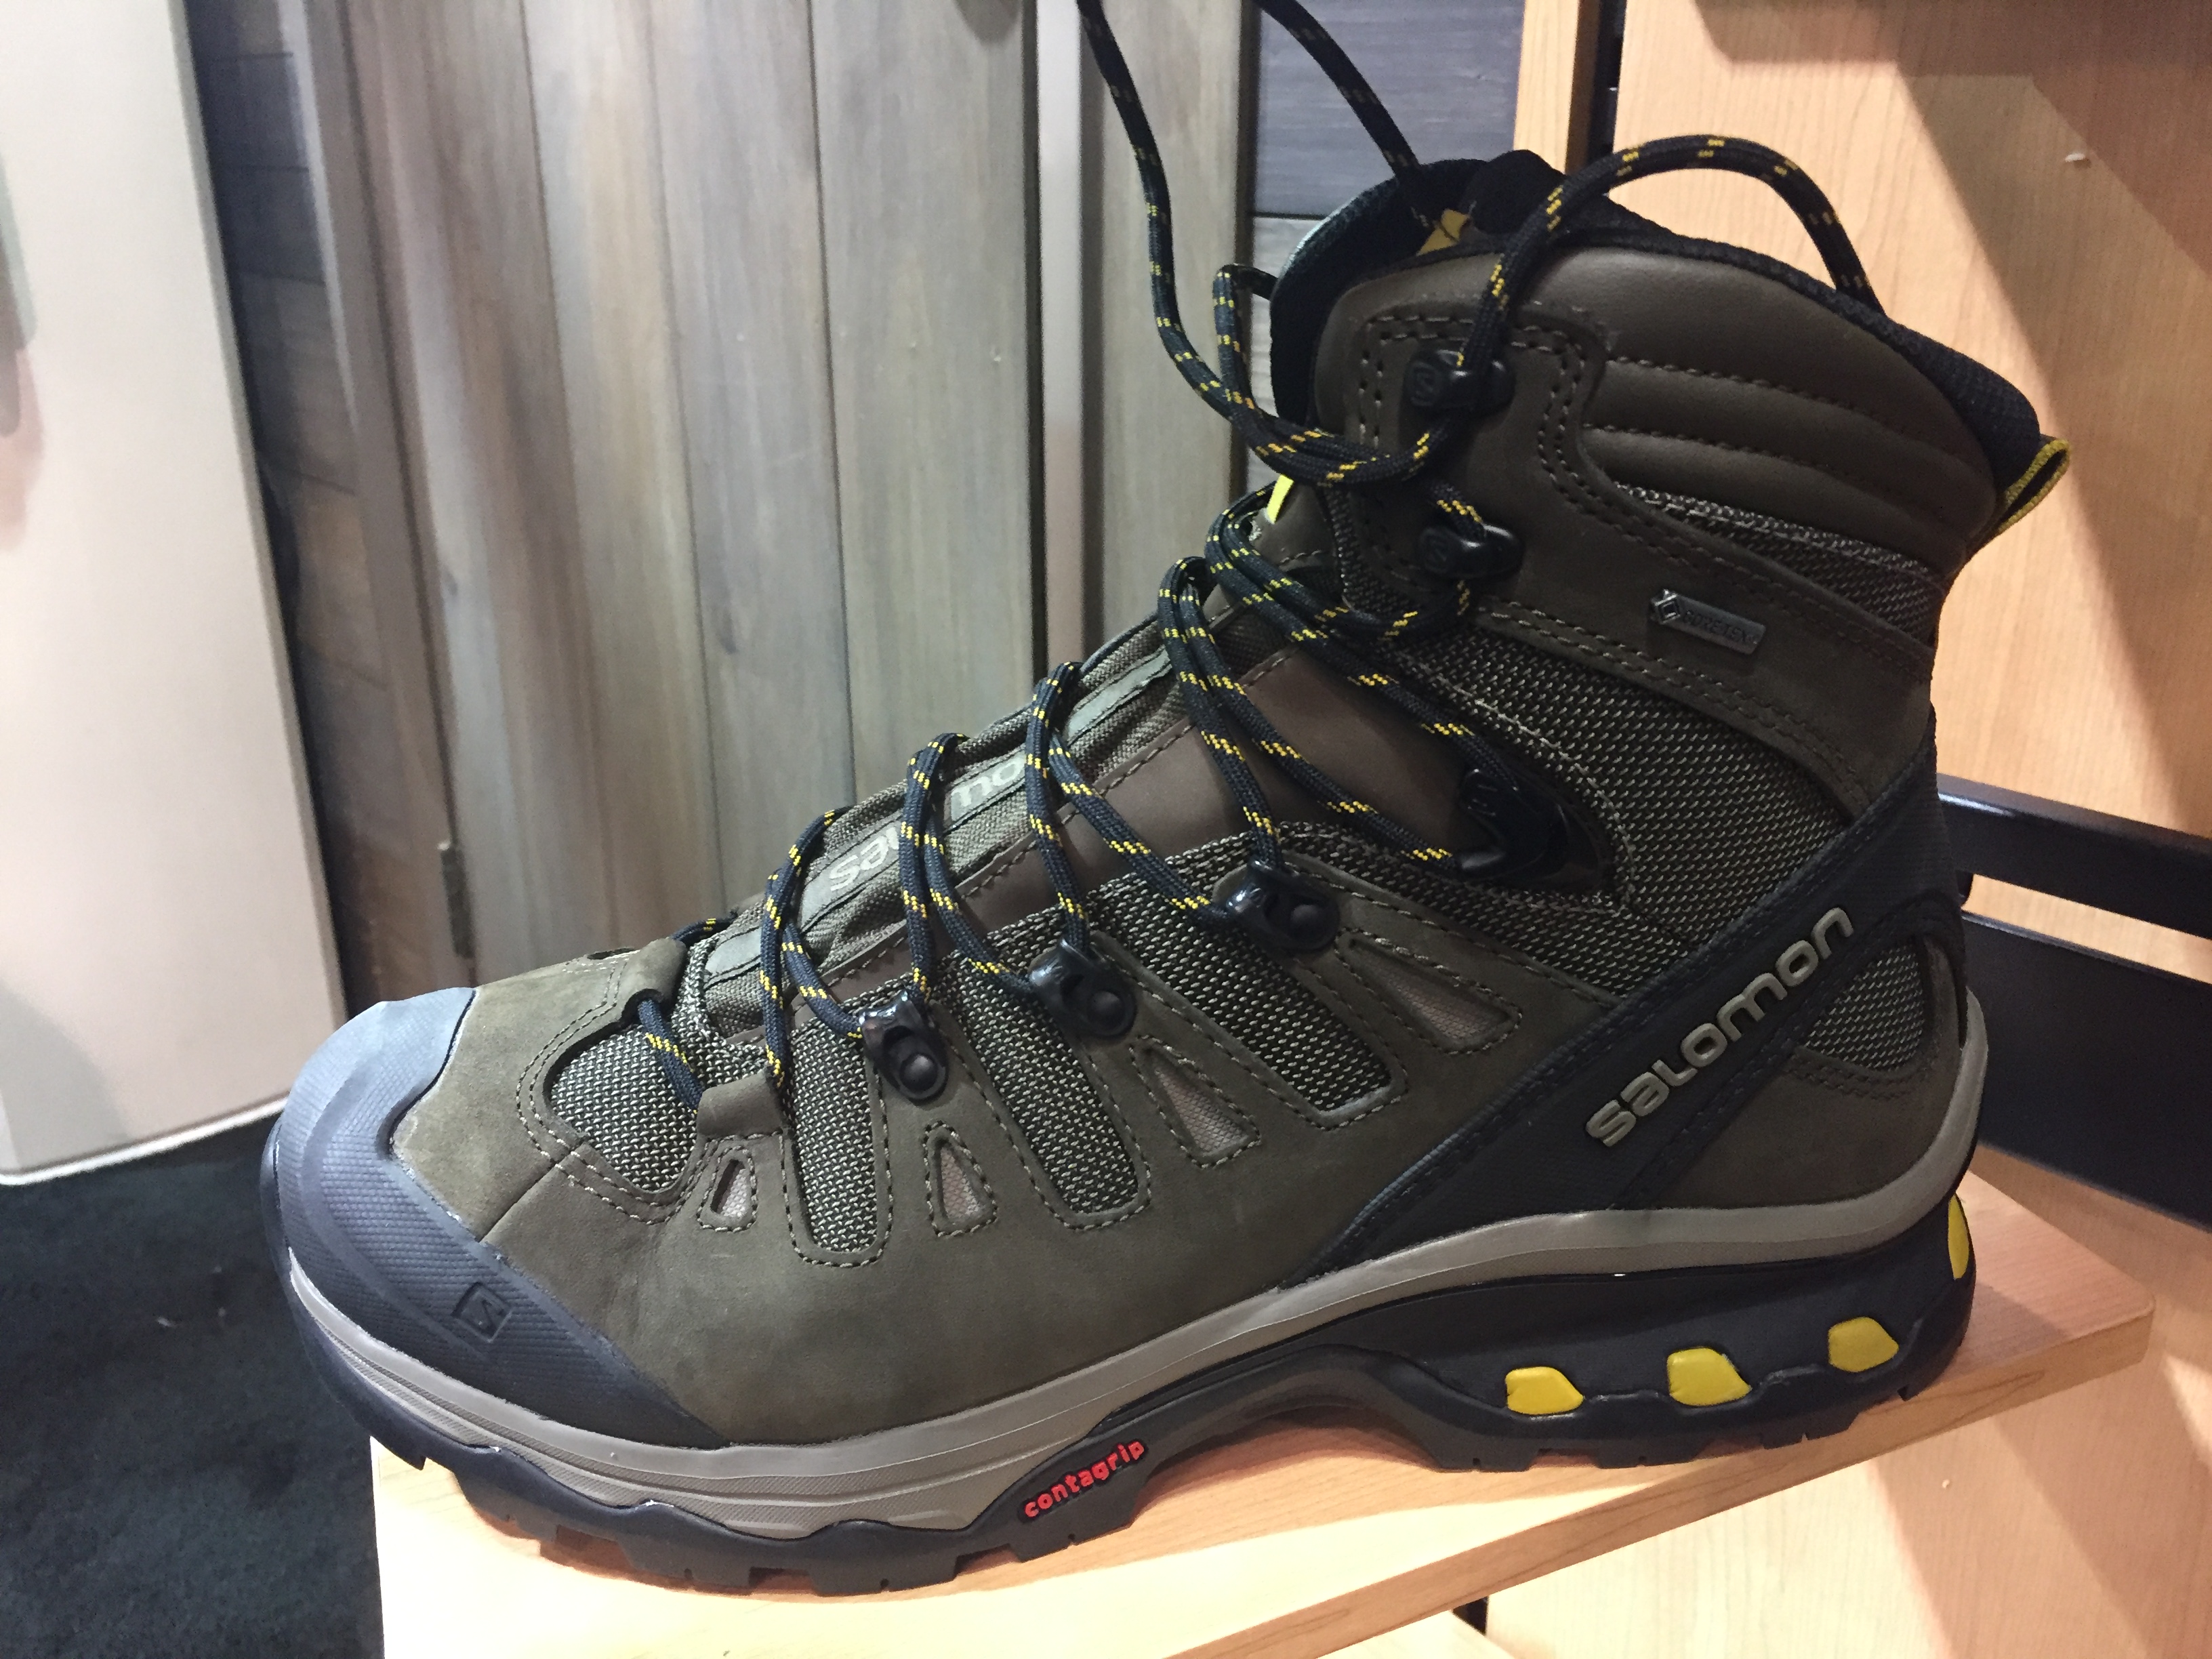 Salomon shows off new hiking boots at 